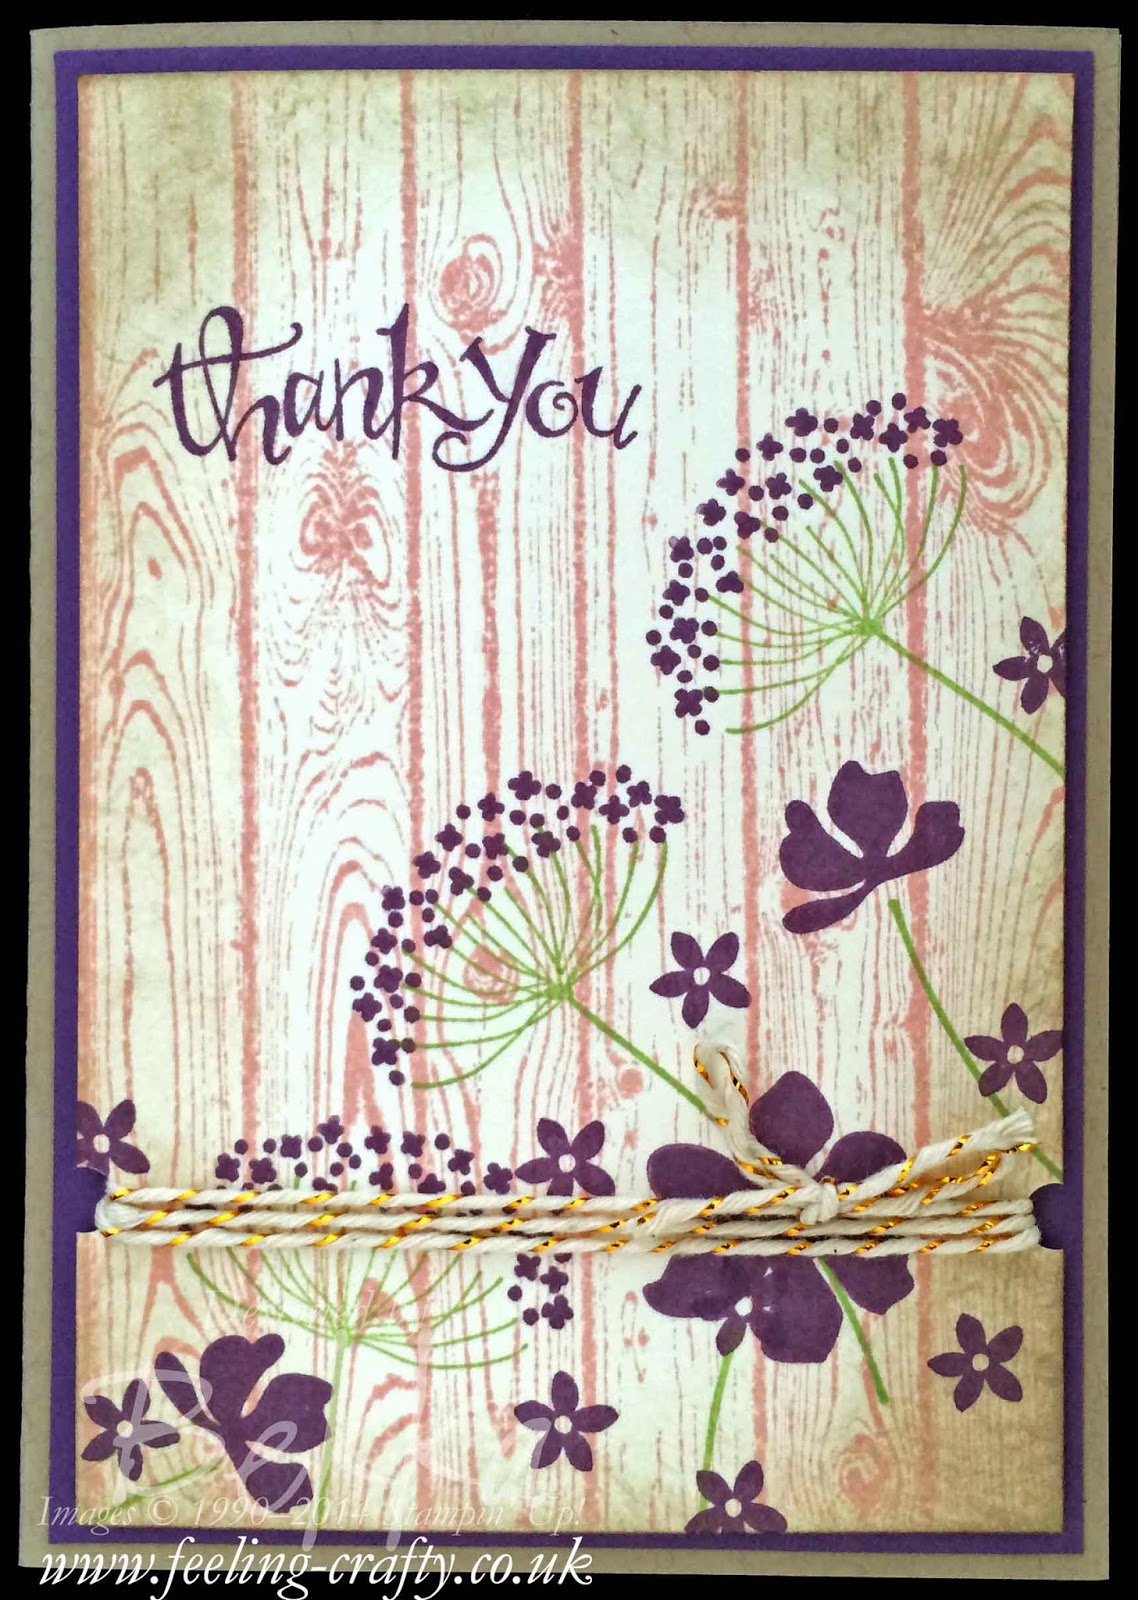 Thank You card featuring the Summer Silhouettes Stamp Set from Stammpin' Up! UK Independent Demonstrator Bekka - check her blog for lots of cute ideas